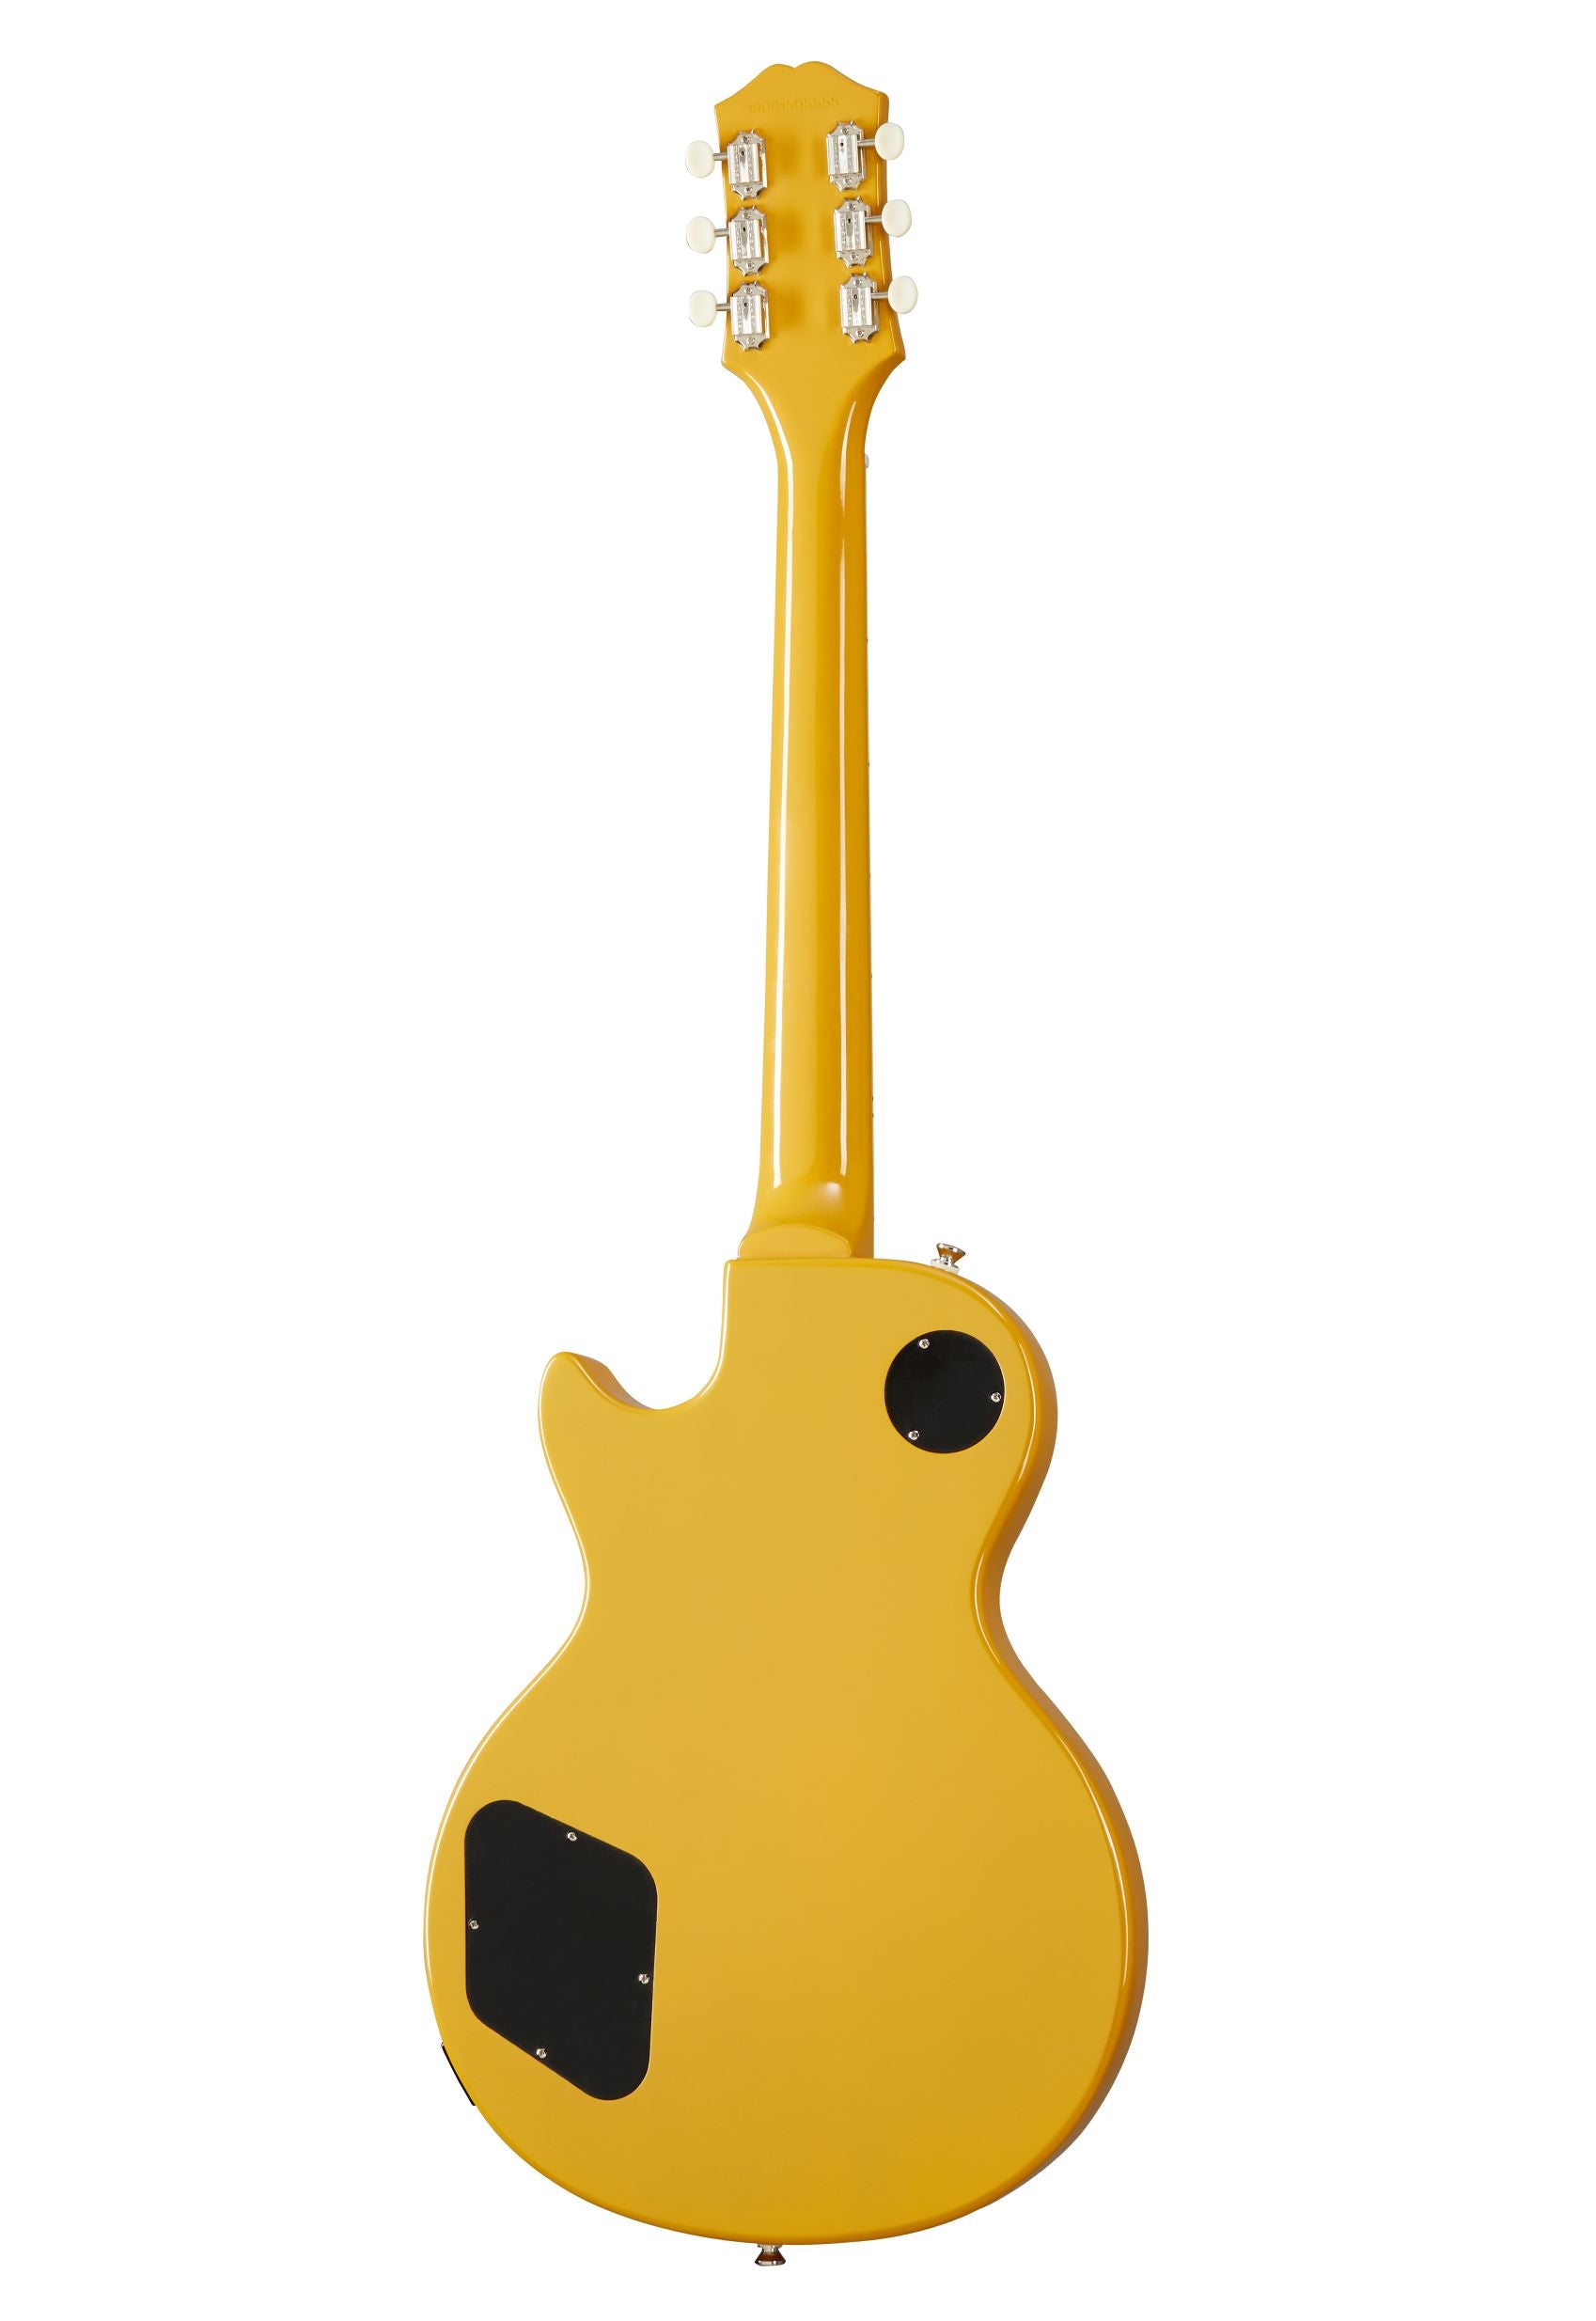 Epiphone EILPTVNH1 Les Paul Special Solidbody Electric Guitar Tv Yellow